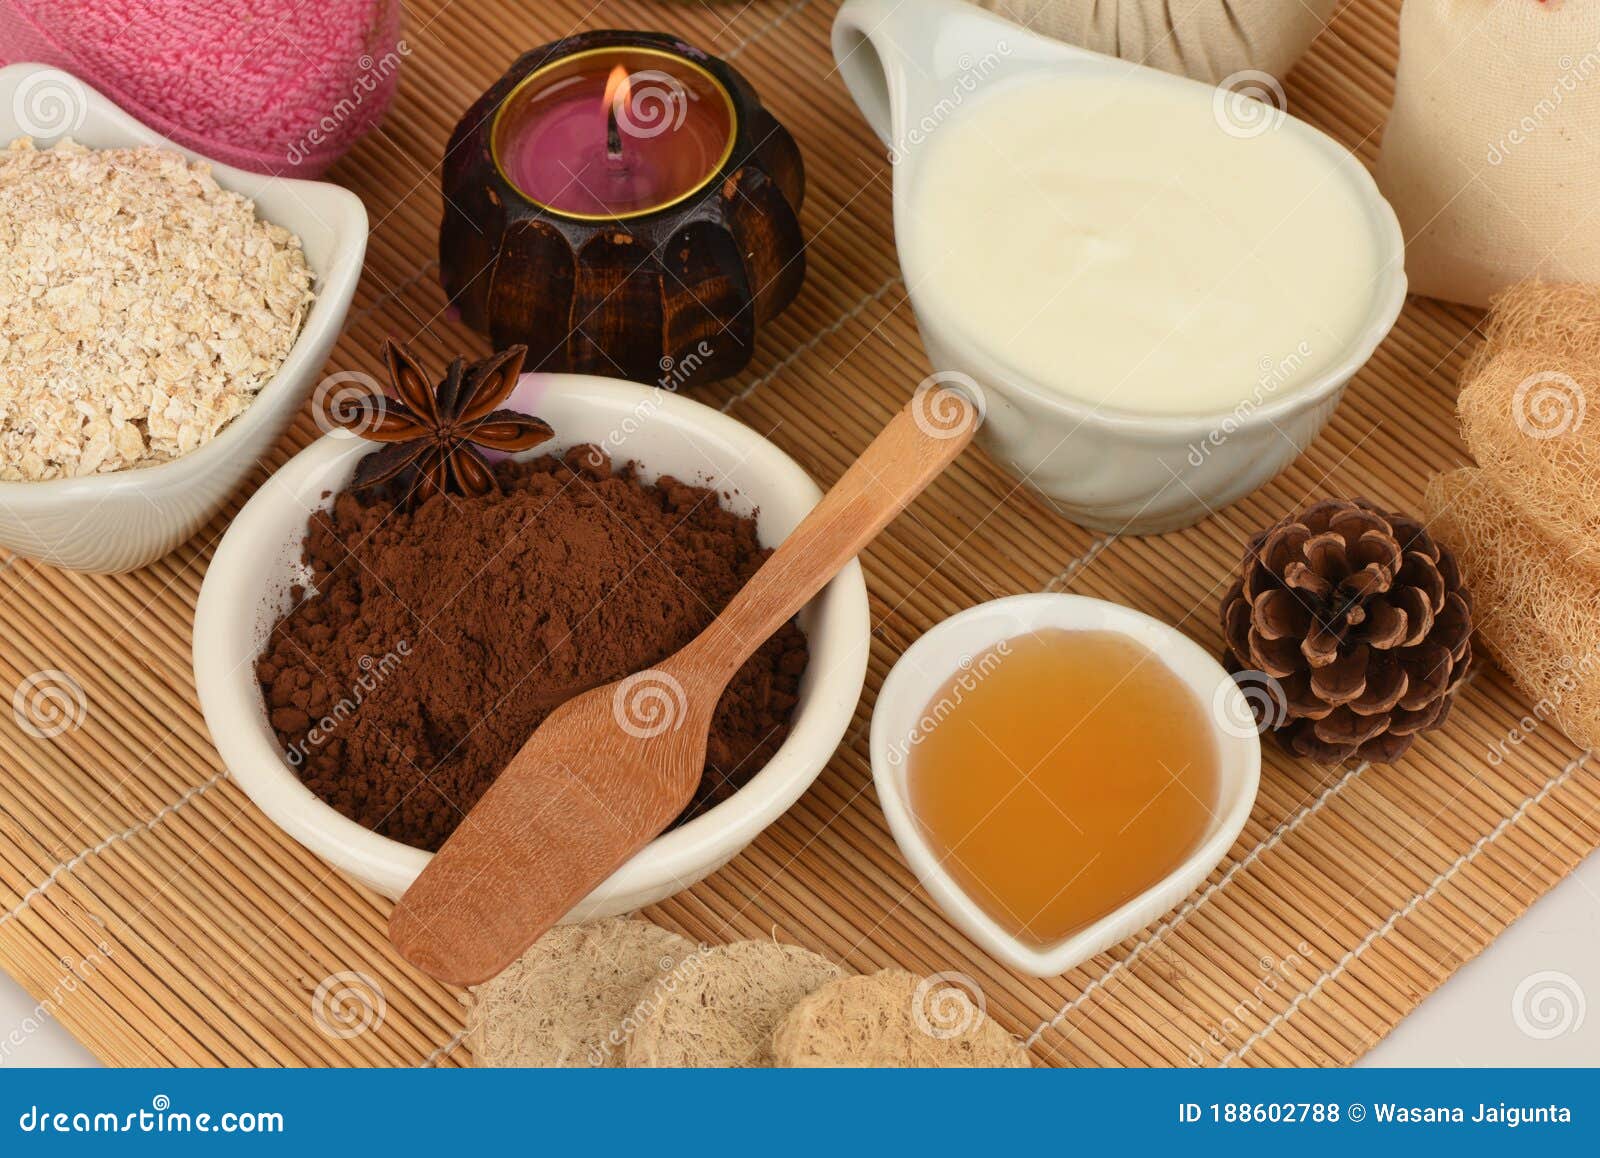 Download 434 Oatmeal Honey Mask Photos Free Royalty Free Stock Photos From Dreamstime PSD Mockup Templates